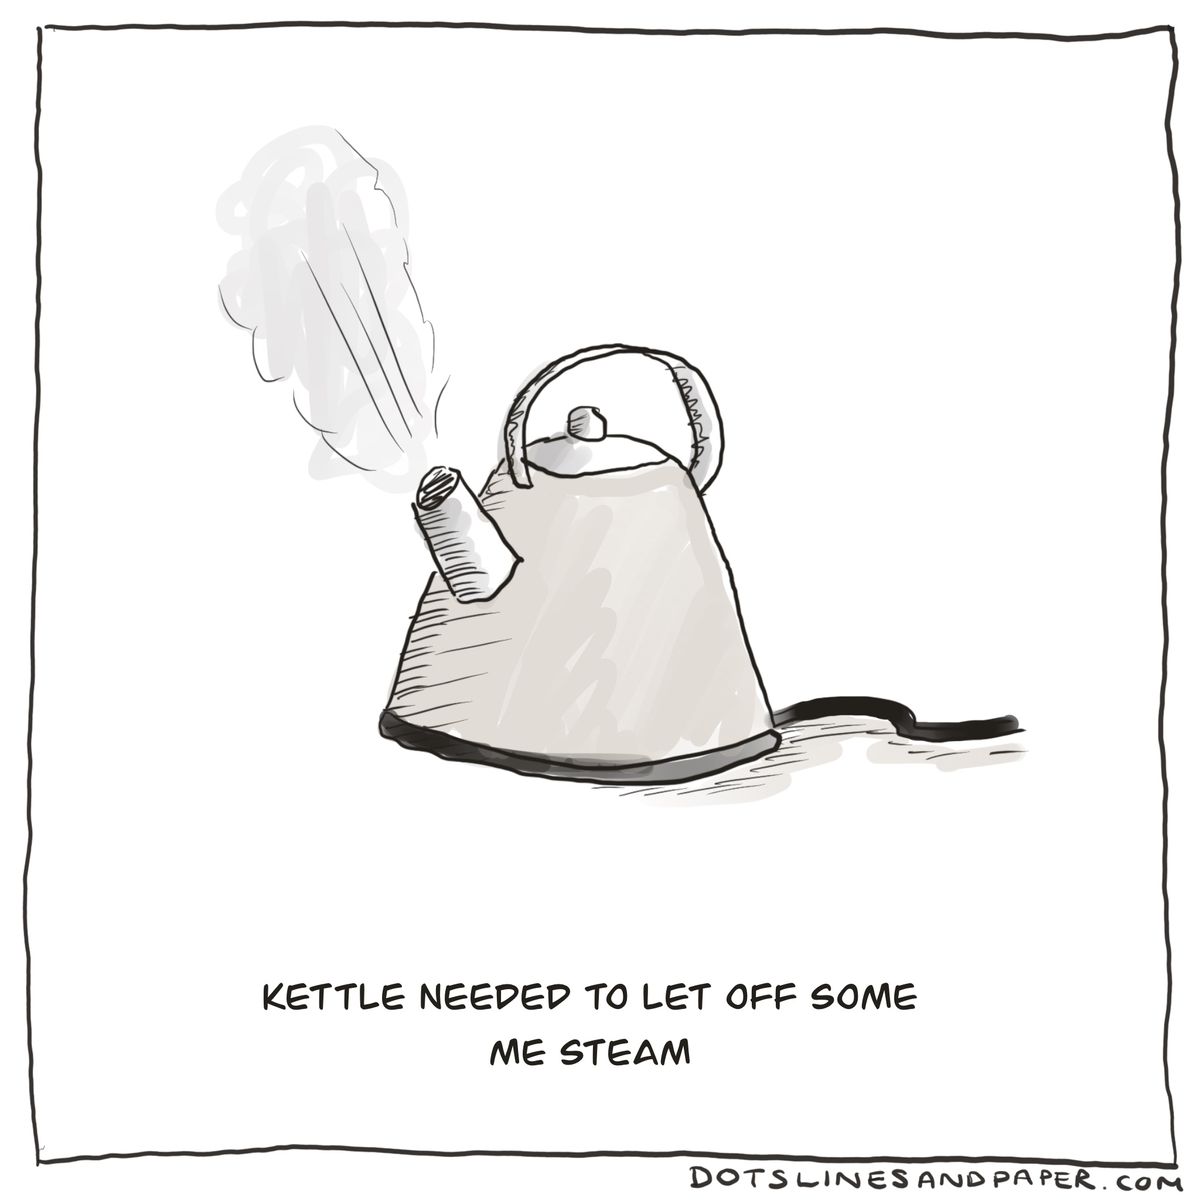 Kettle needed to let off some me steam